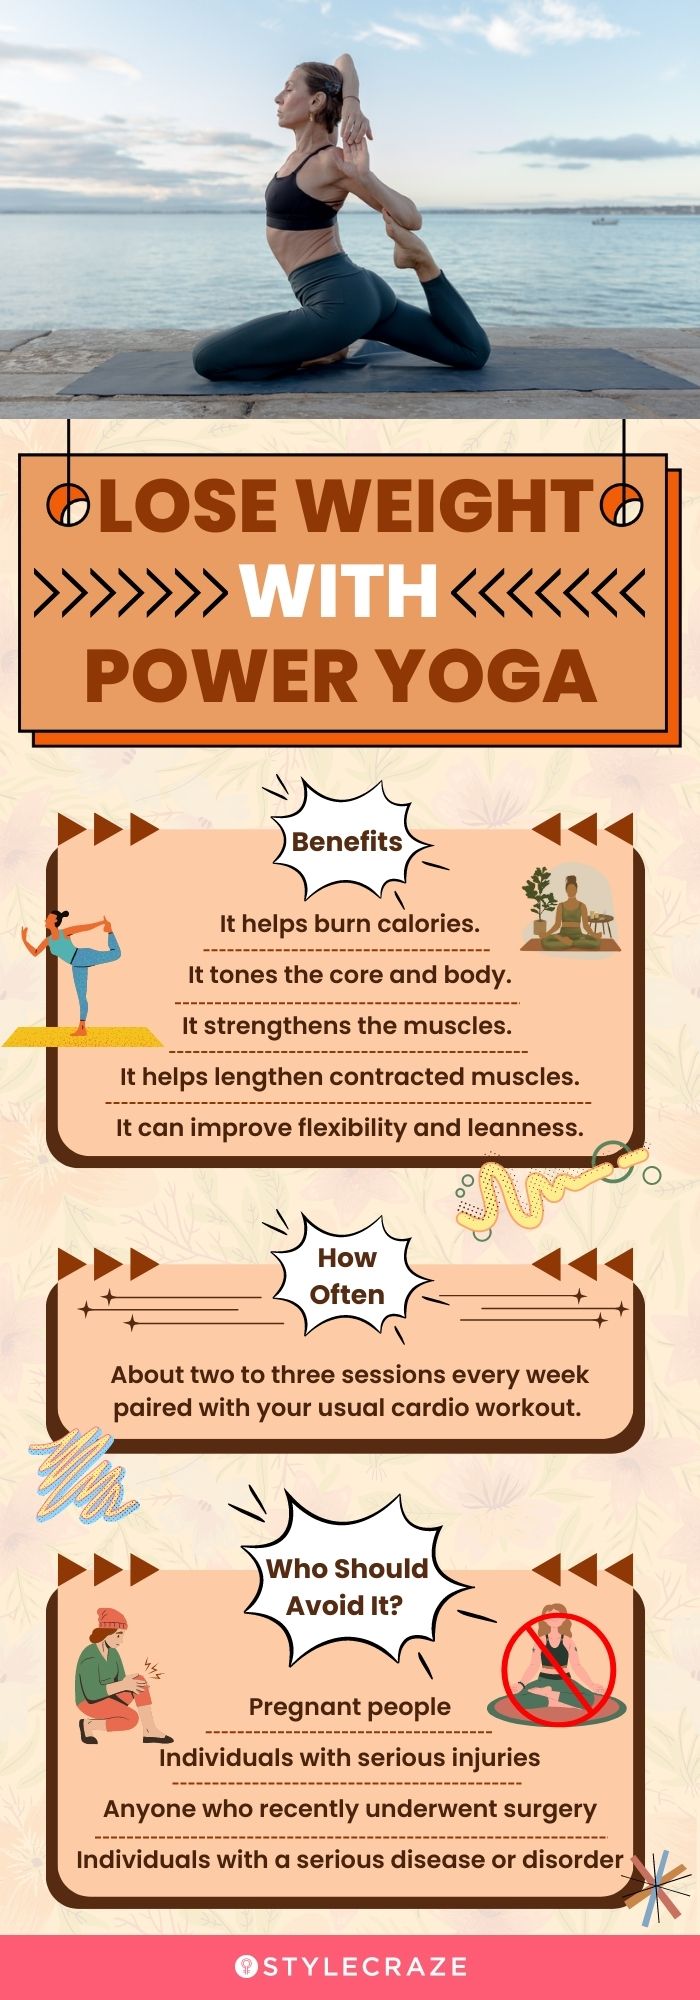 lose weight with power yoga (infographic)